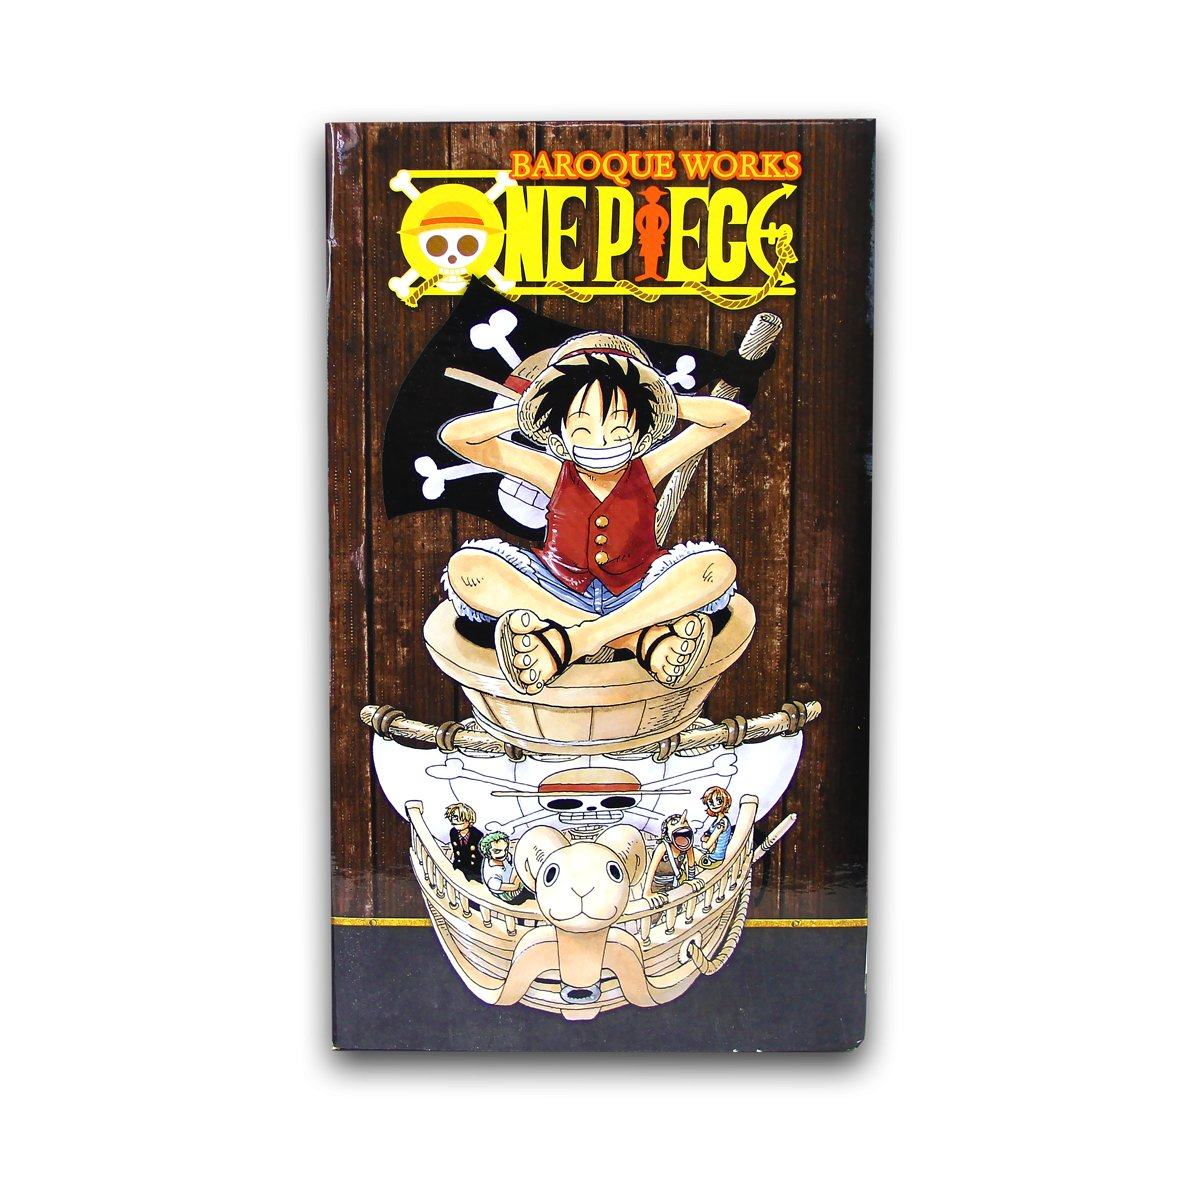 One Piece by Eiichiro Oda Box Set 1: East Blue and Baroque Works Vol. 1-23 23 Books - Ages 14+ - Paperback